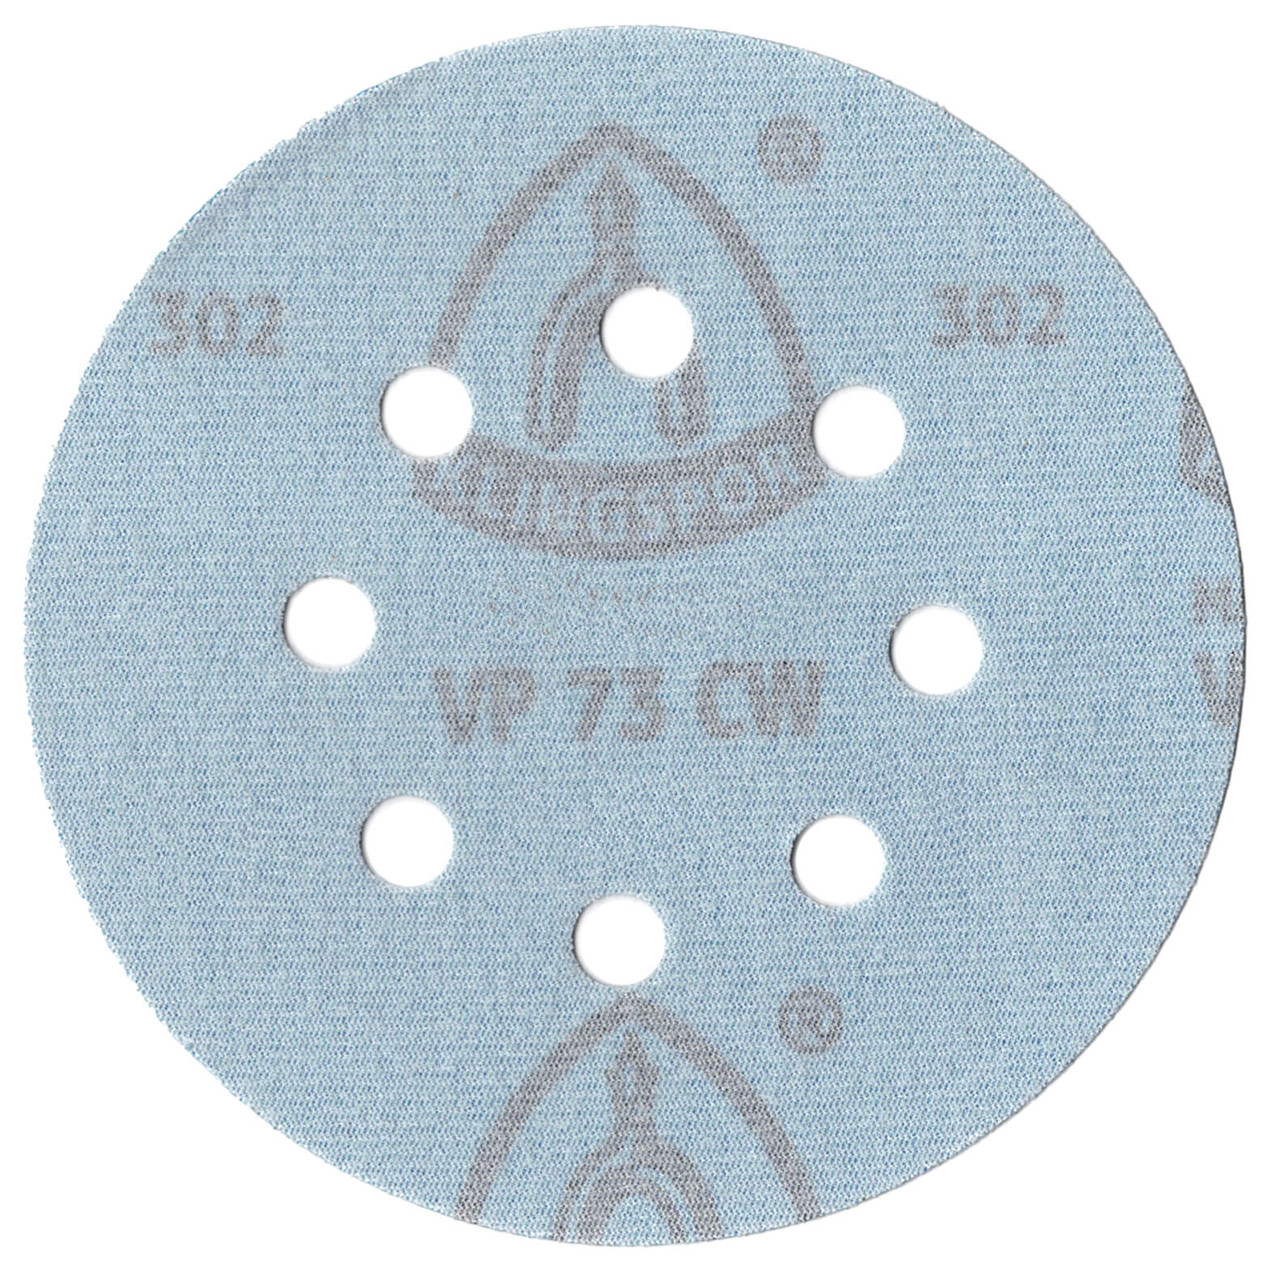 5inX 8H Stearate Latex 240 Grit H&L 50pk back of Disc